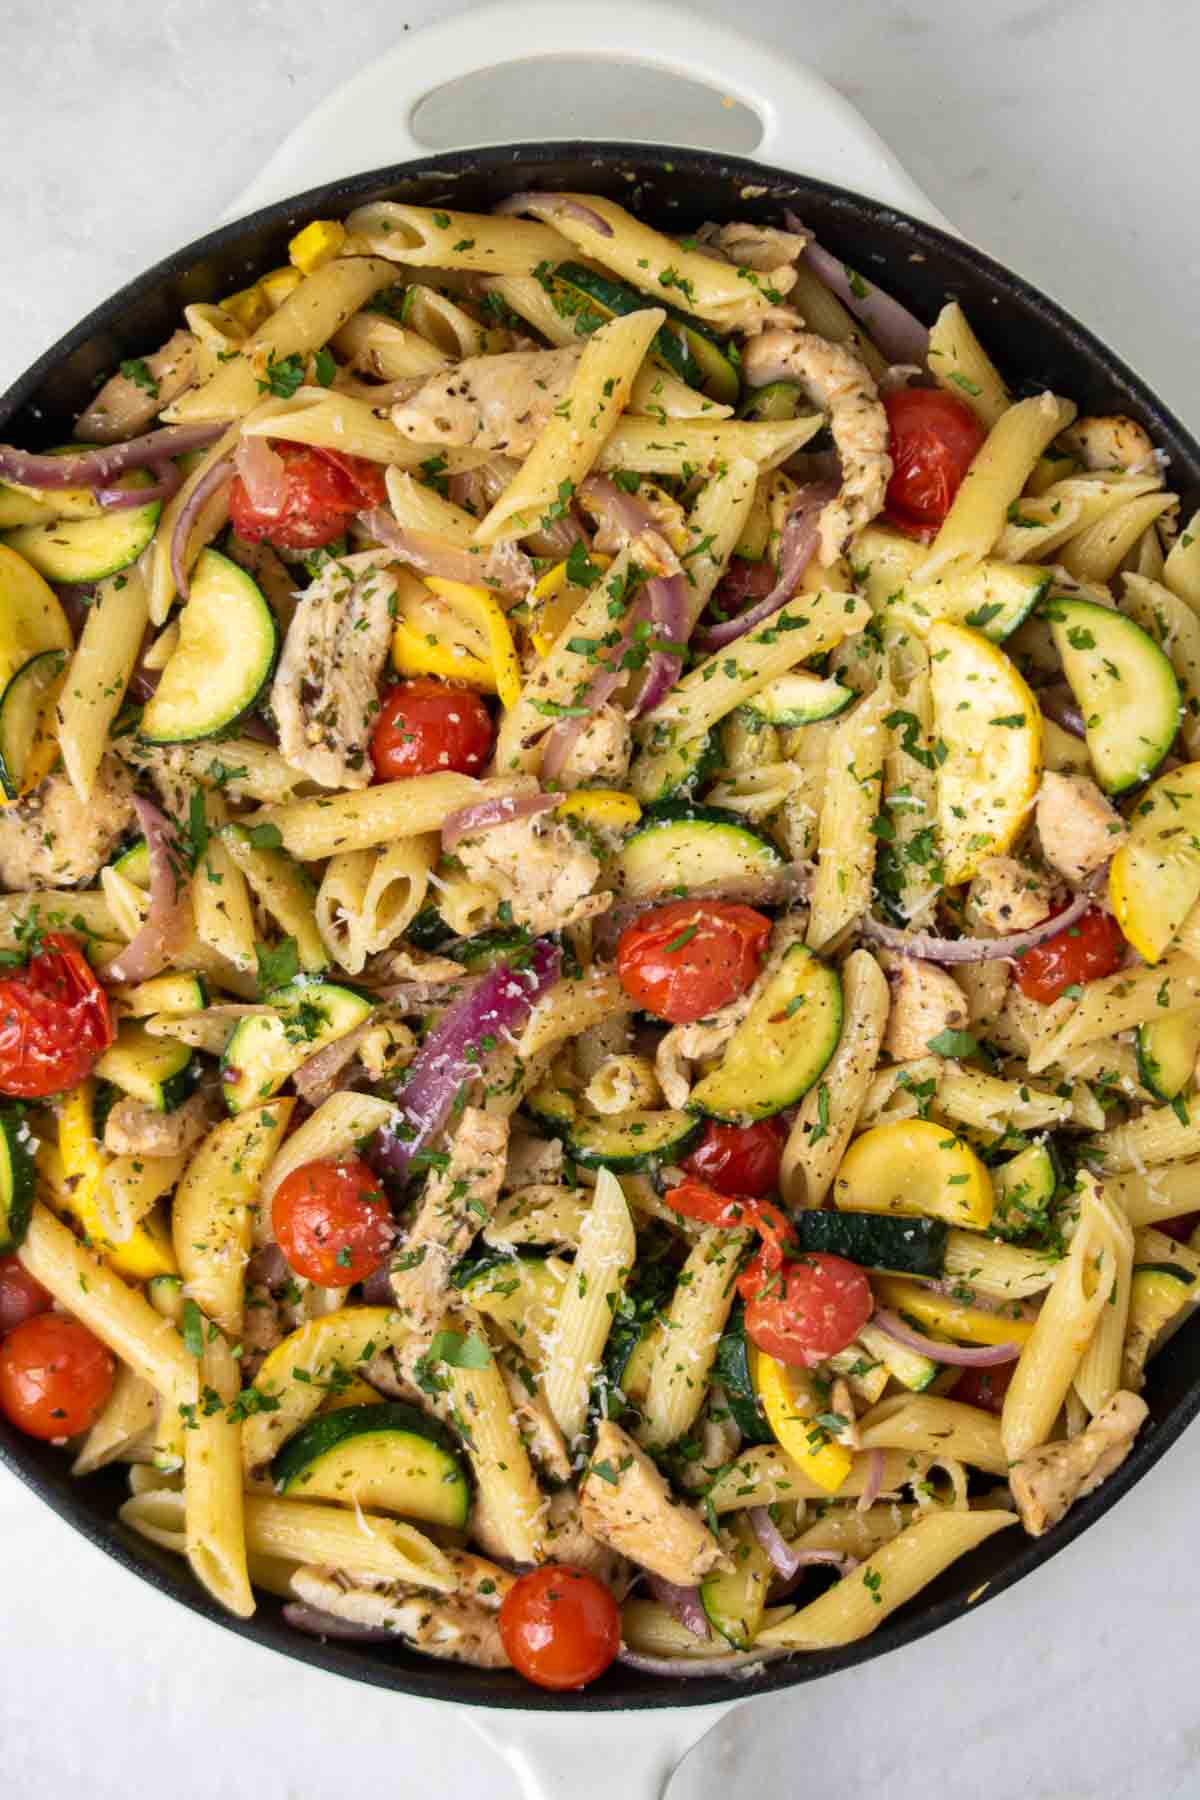 Pasta with chicken, zucchini, cherry tomatoes, red onion, and herbs in a cast iron skillet.